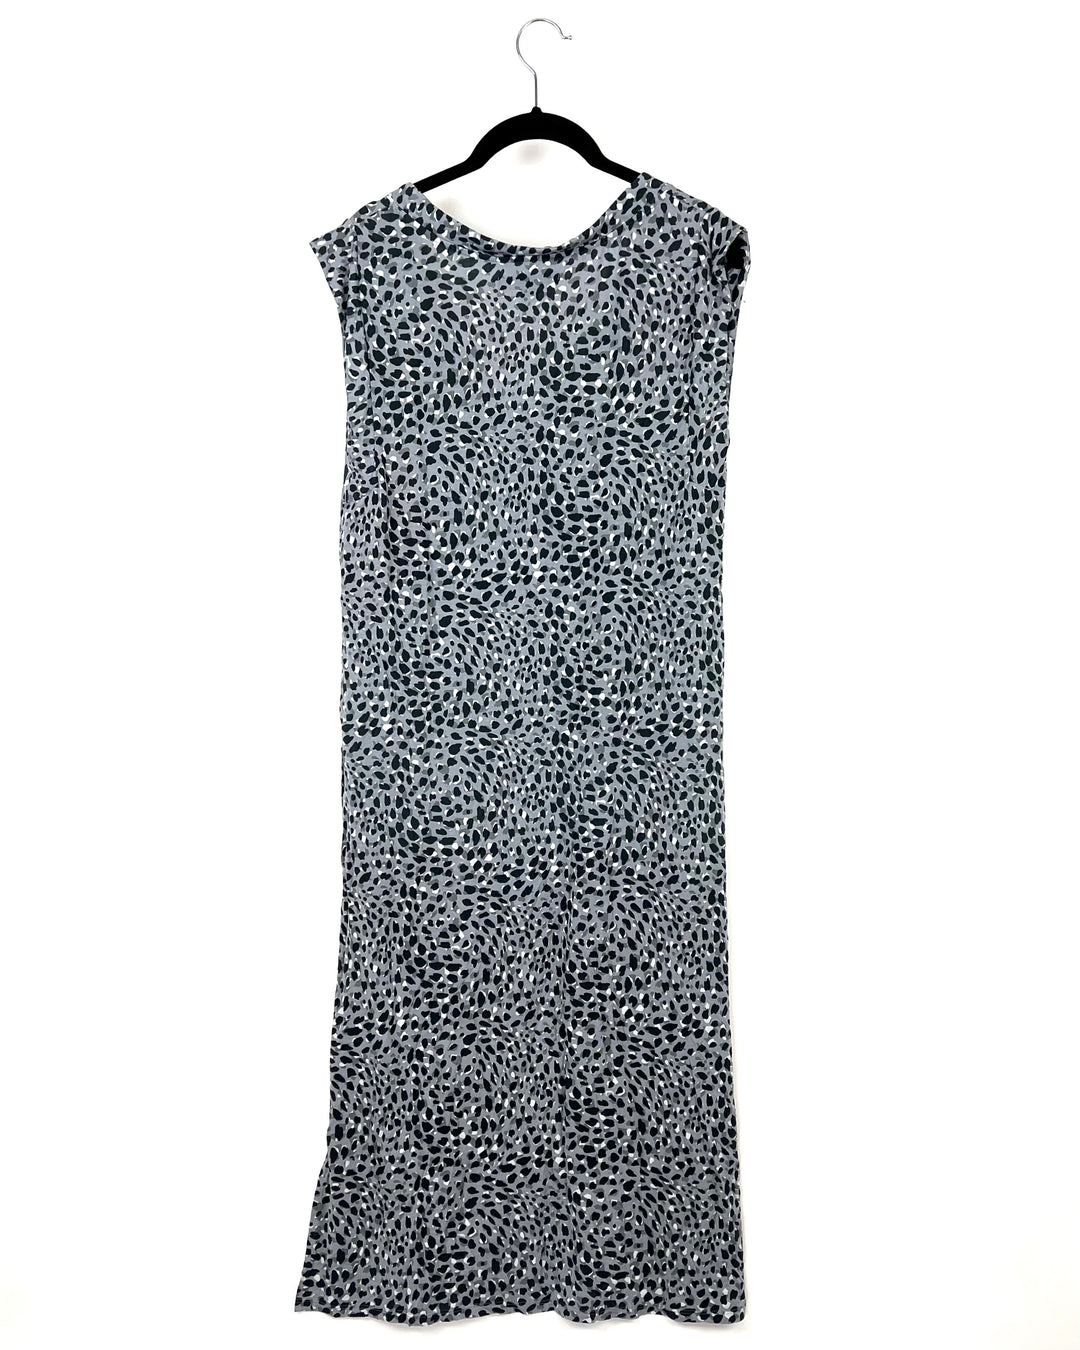 Grey and Black Cheetah Print Nightgown With Pockets - Size 4/6